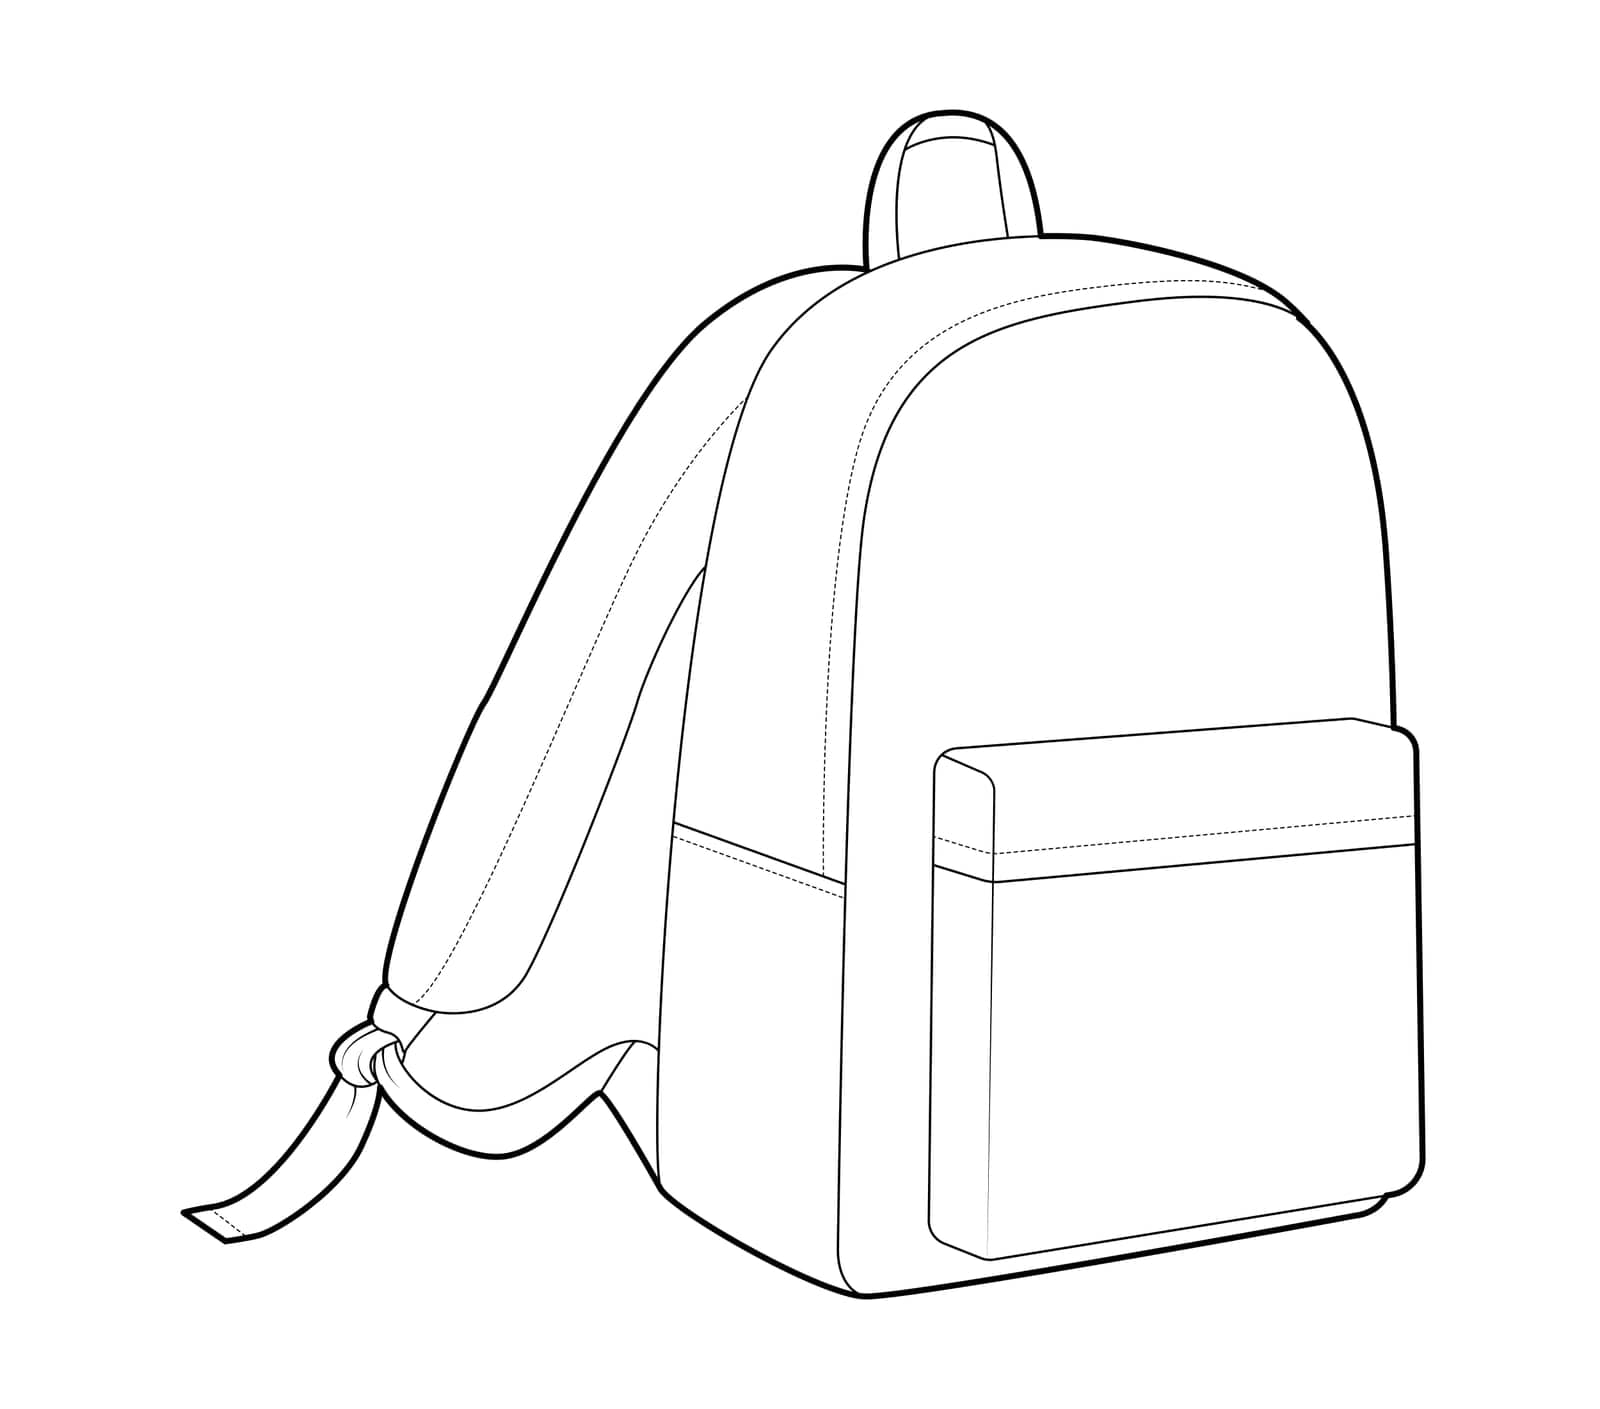 Backpack silhouette bag. Fashion accessory technical illustration. Vector schoolbag 3-4 view for Men, women, unisex style, flat handbag CAD mockup sketch outline isolated